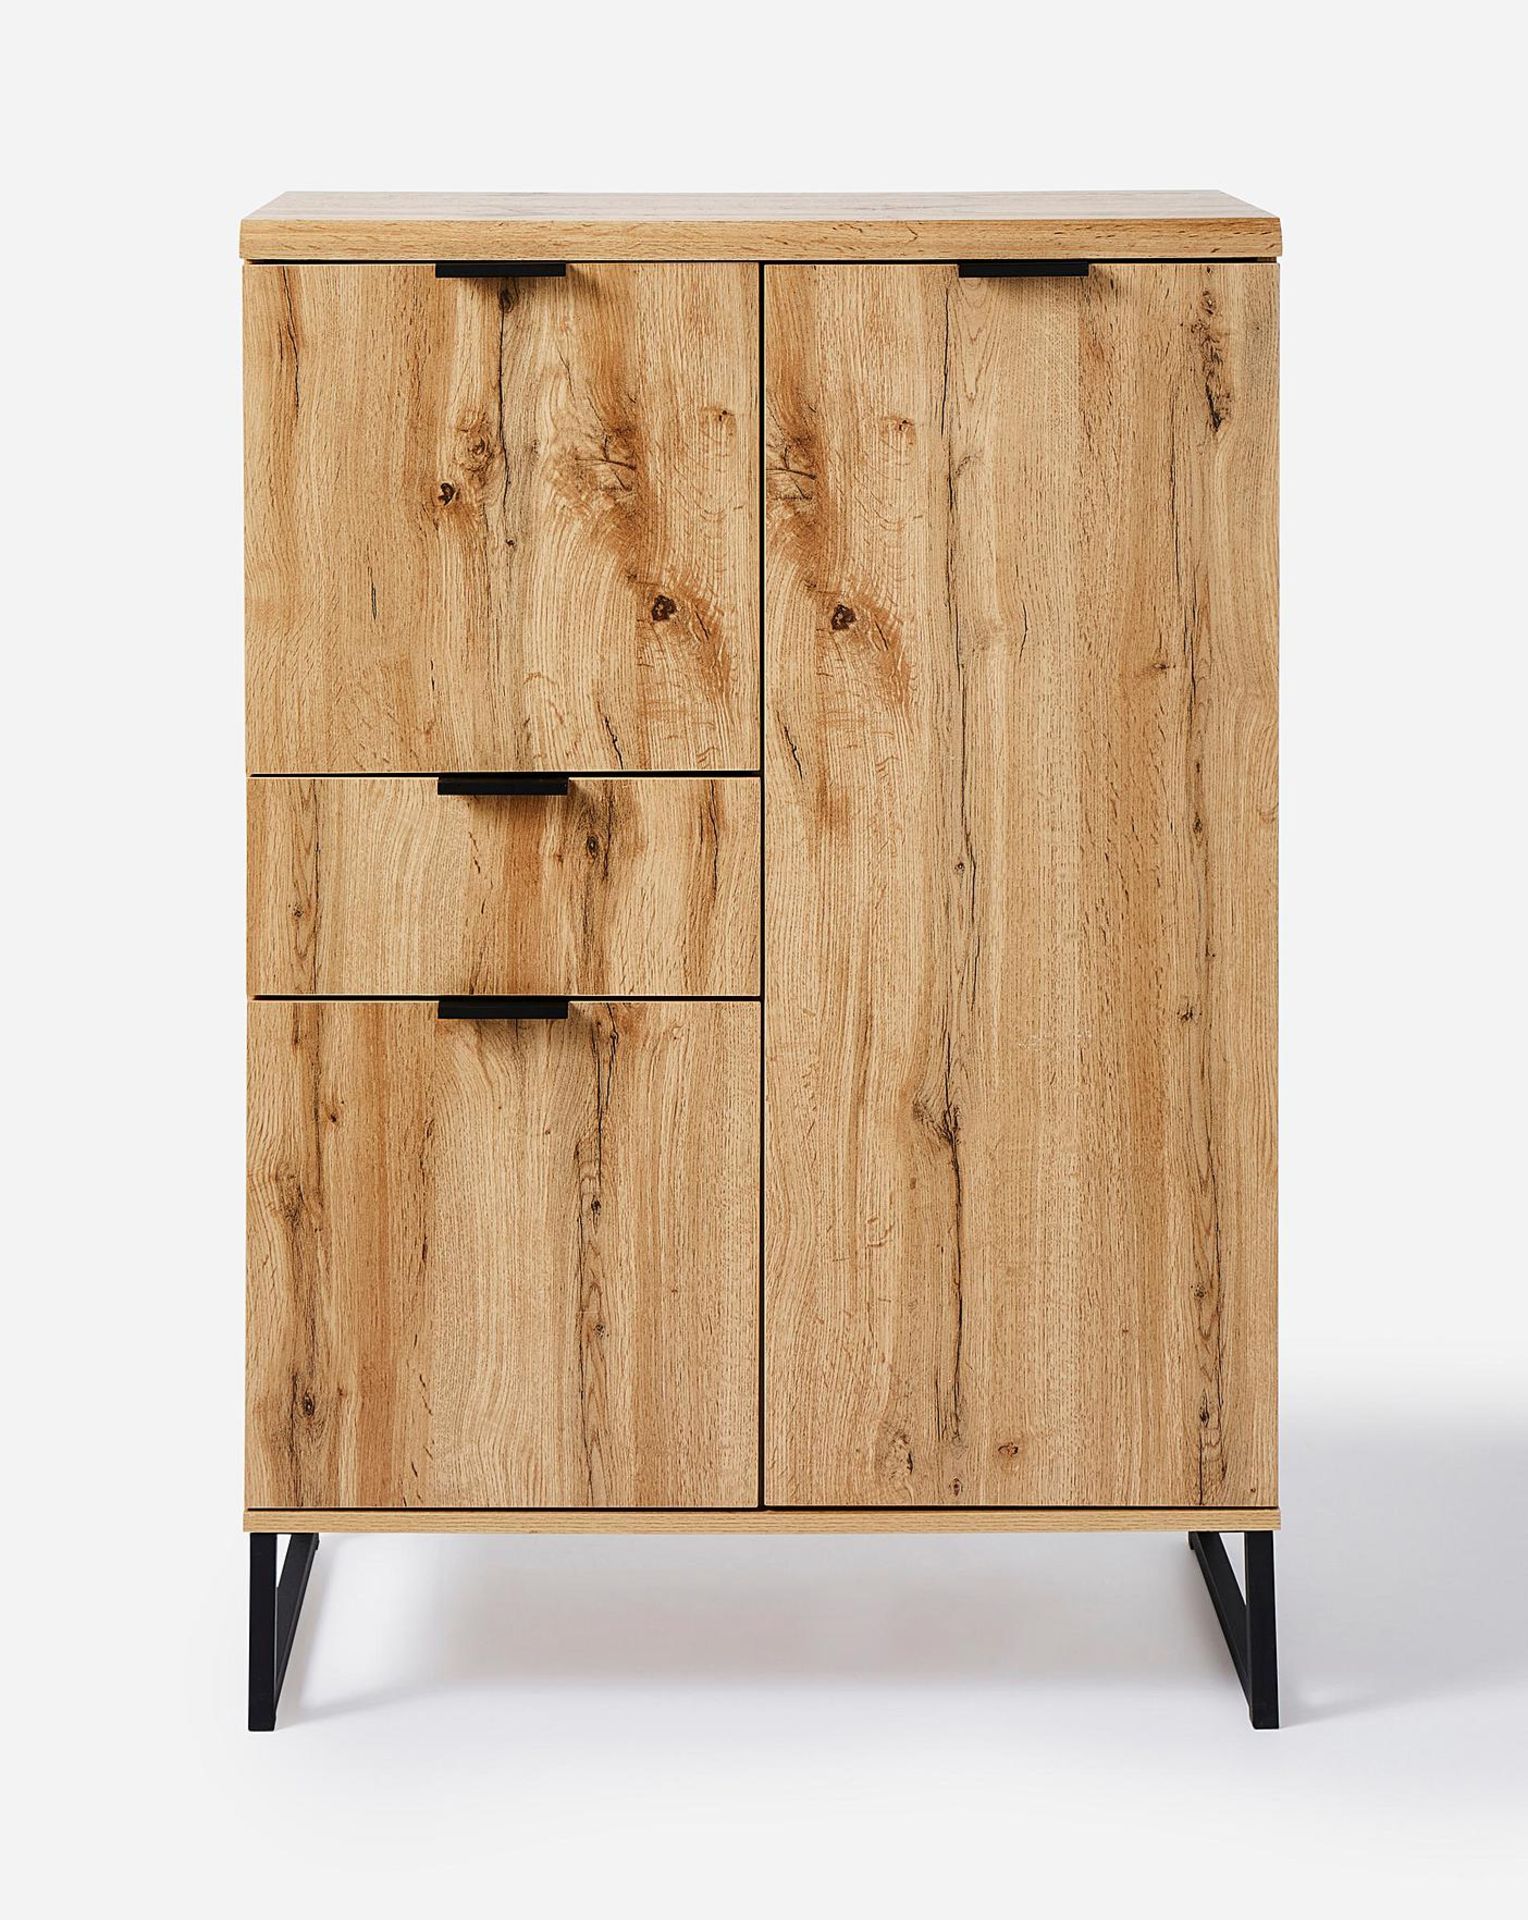 BRAND NEW SHOREDITCH Drinks Cabinet. OAK. RRP £299. The Shoreditch Range is a contemporary and - Image 4 of 8